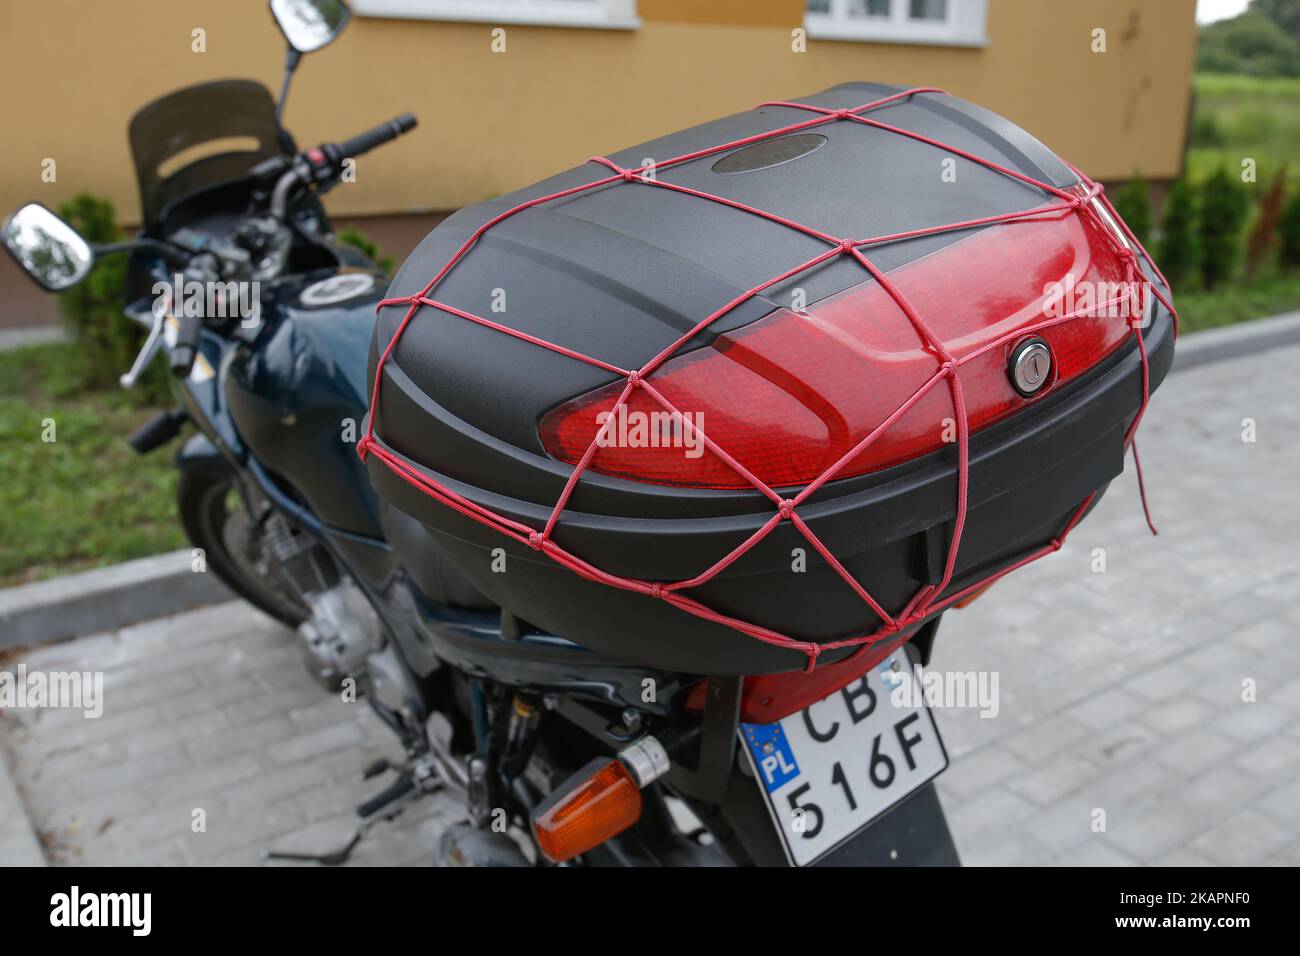 A topcase for storing items during travel on a motorcylce is seen with reflective bakclights in Bydgoszcz, Poland, on 19 August, 2017. (Photo by Jaap Arriens/NurPhoto) Stock Photo